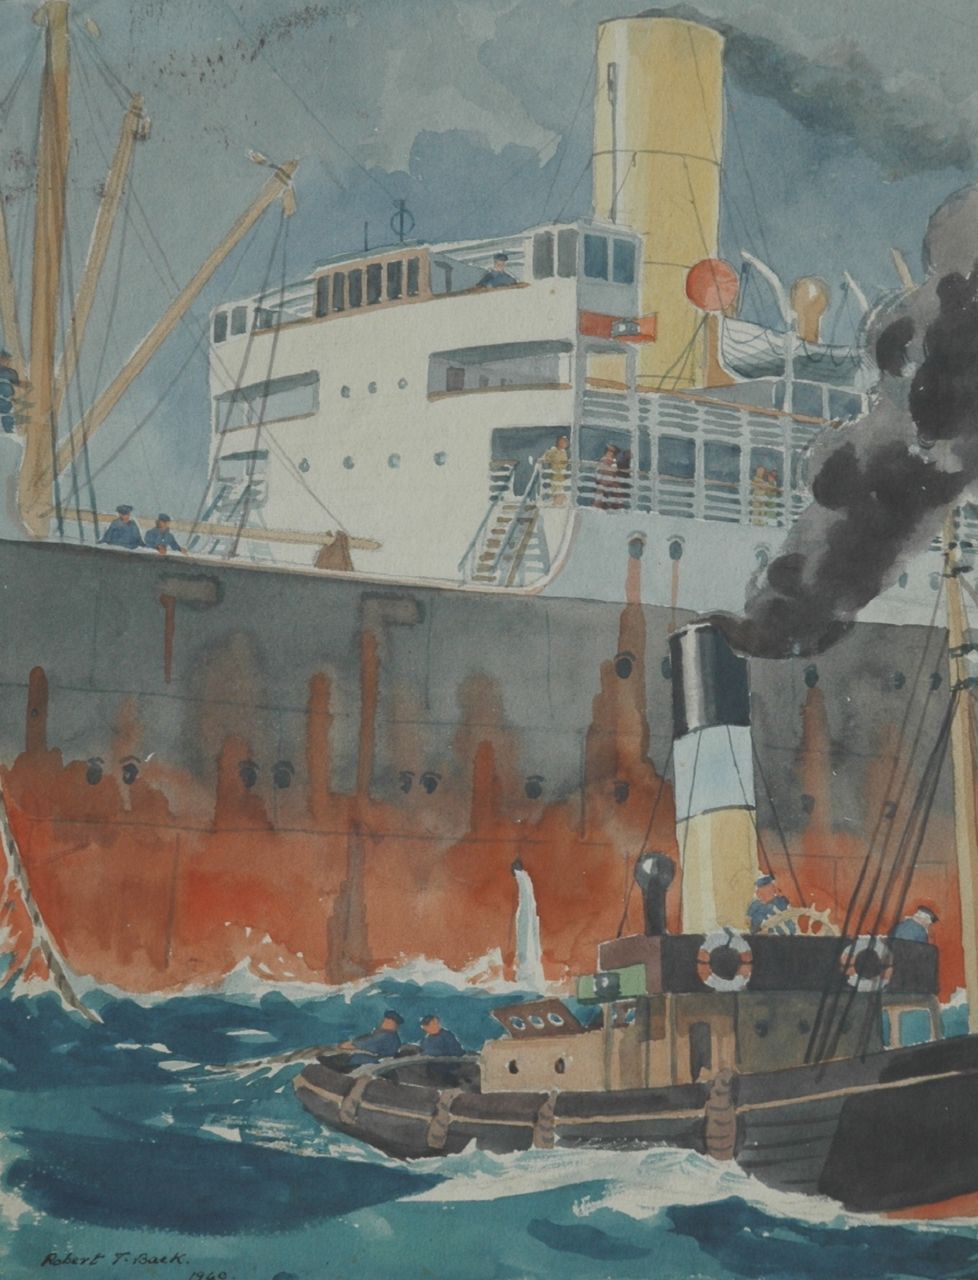 Back R.T.  | Robert Trenaman Back, The towboat takes over, Aquarell auf Papier 29,2 x 49,5 cm, signed l.l. und datiert 1940